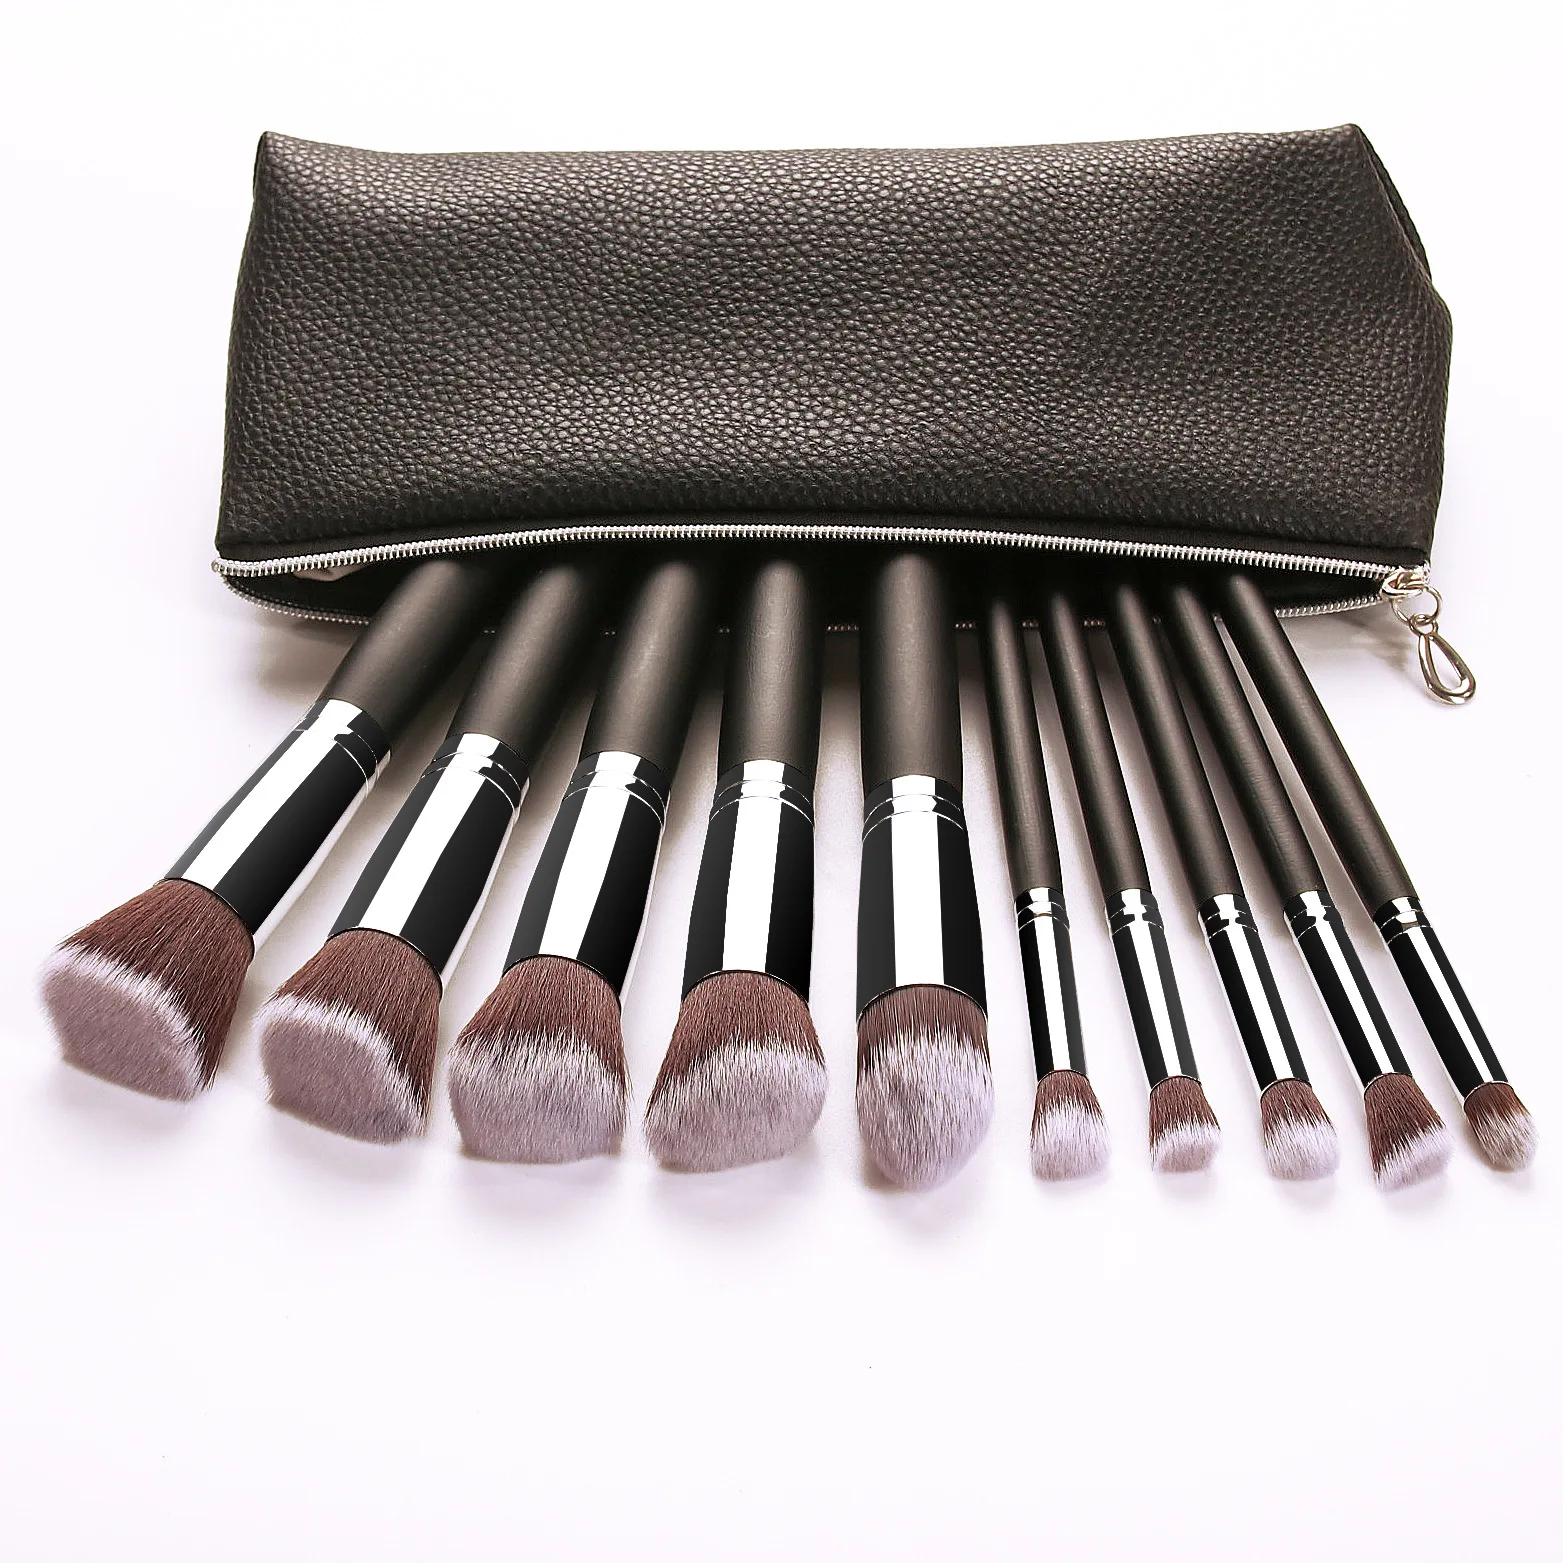 

Hot Selling 10 pcs BS-MALL With Travel Bag Face Beauty Eye Shadow Brush Foundation Brush Makeup Brushes Set